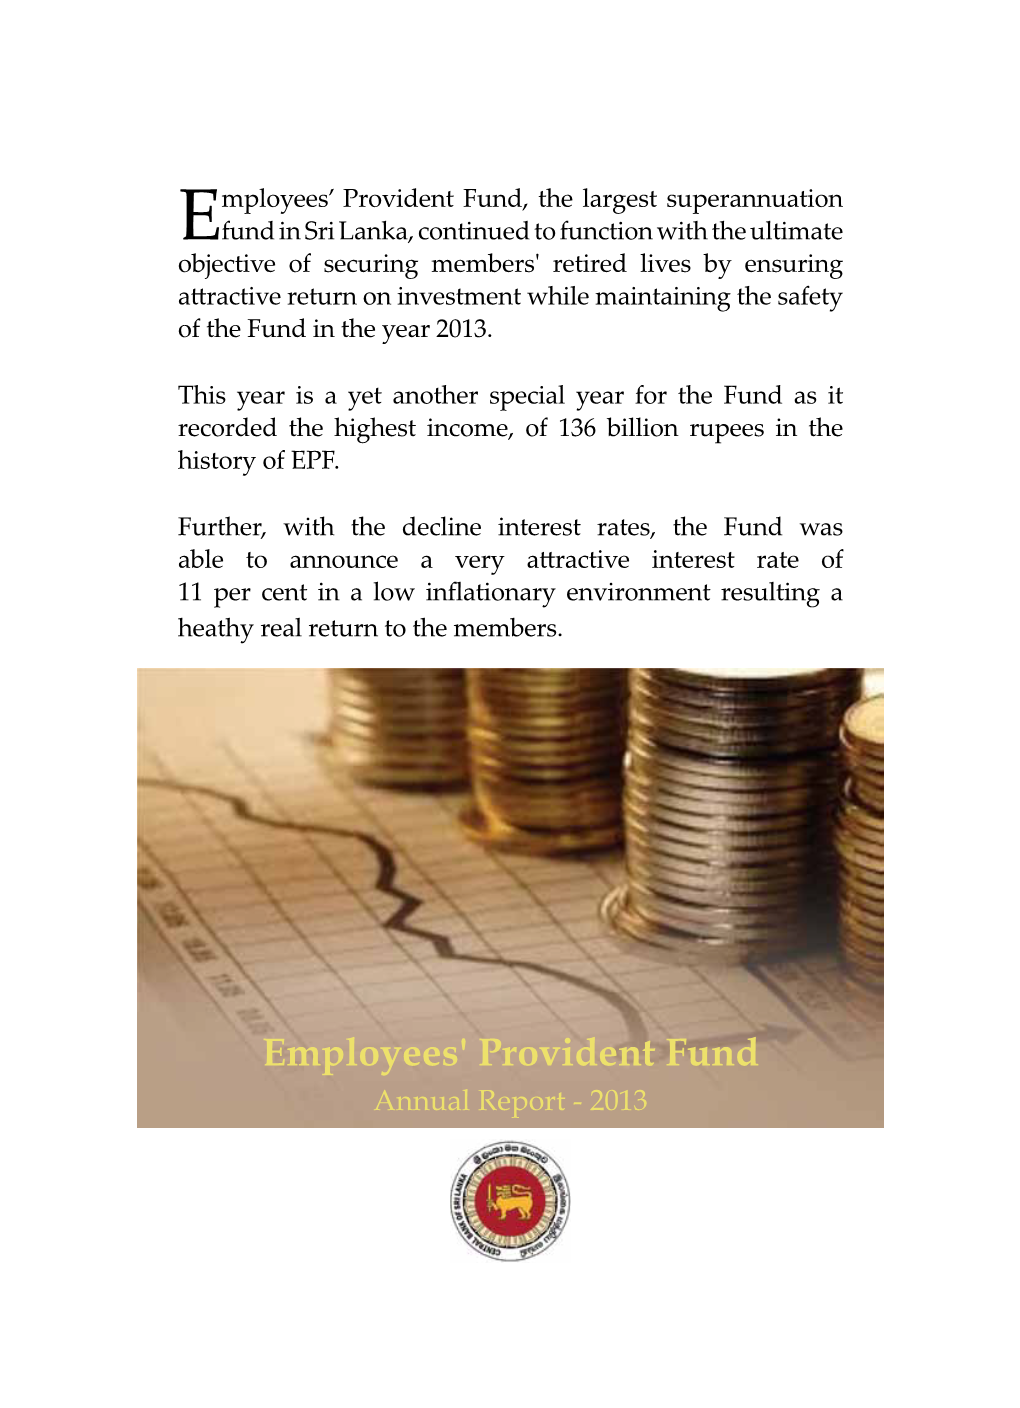 Employees' Provident Fund Annual Report - 2013